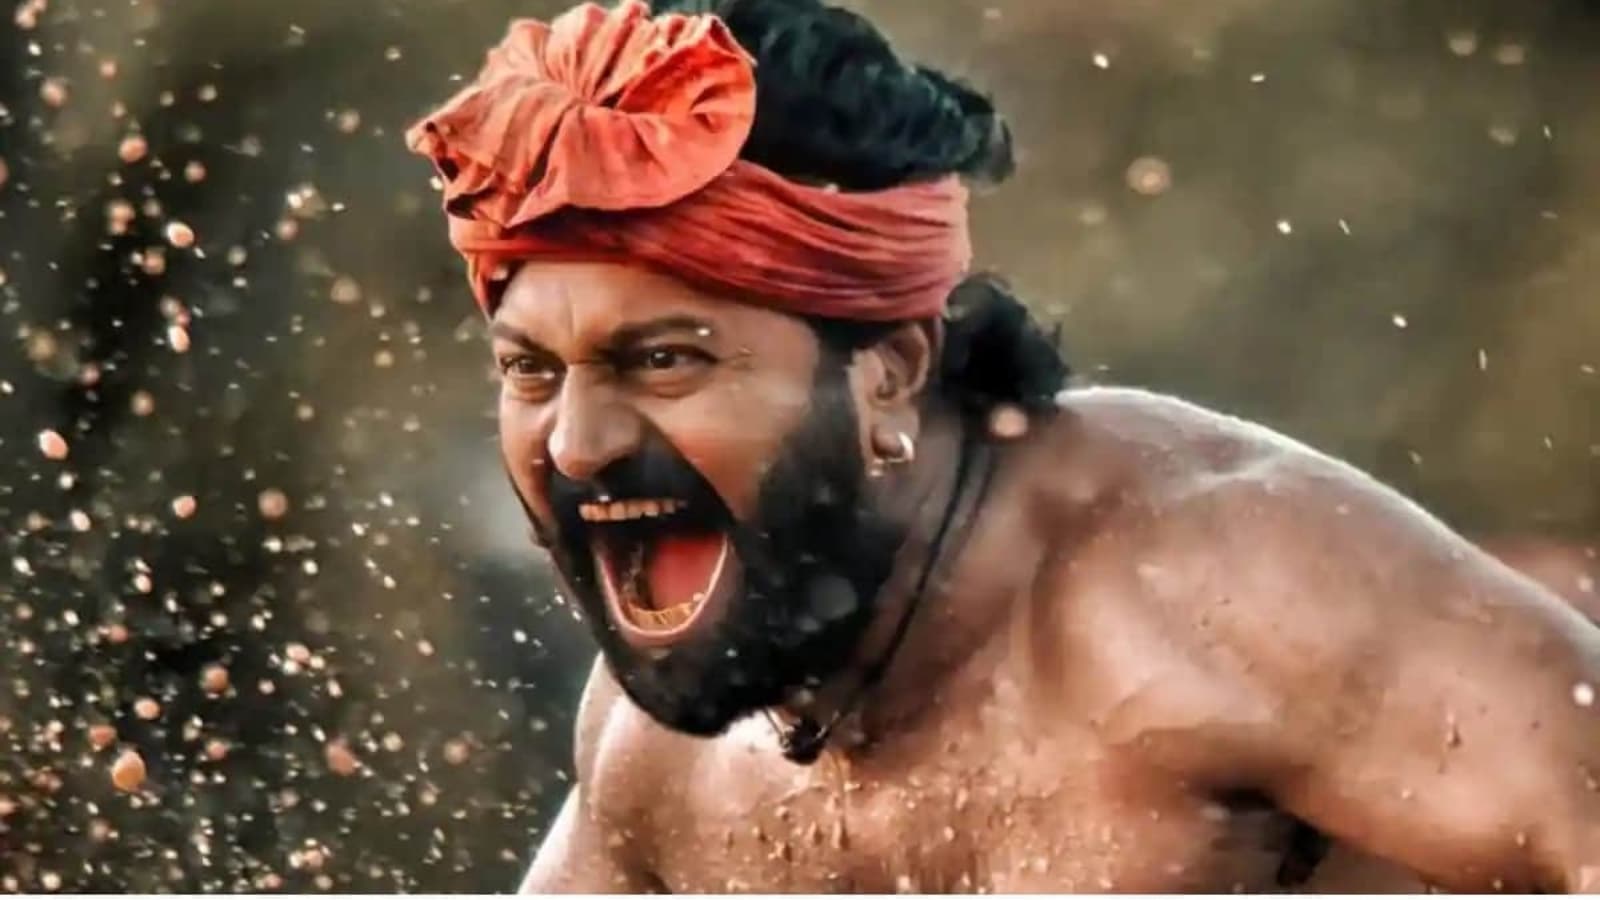 Kantara soars past ₹200 crore worldwide, beats KGF Chapter 2 to become most-watched film ever in Karnataka